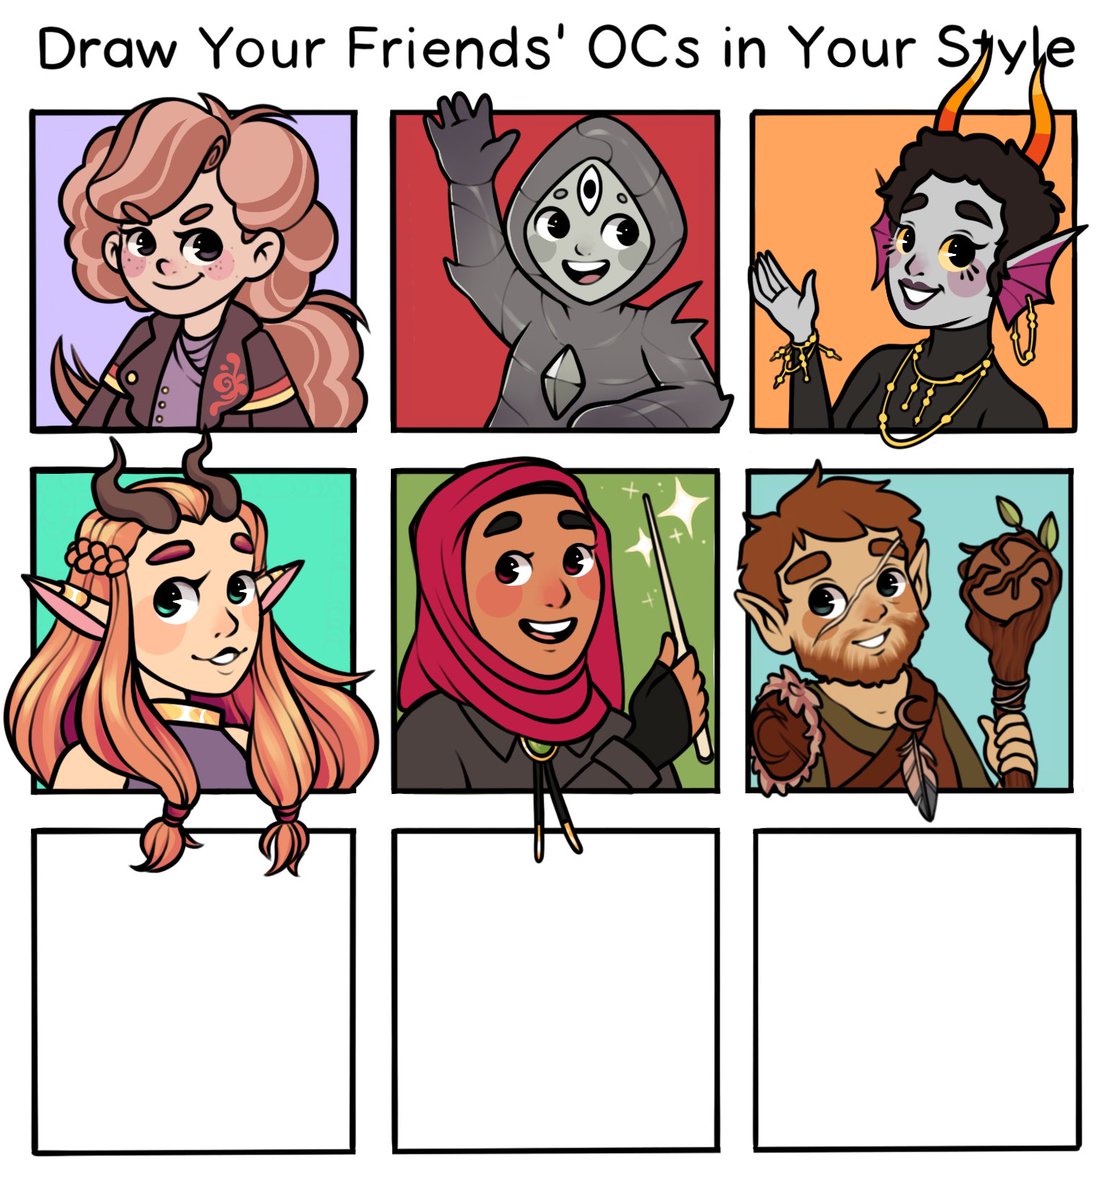 Still got 3 spots left! Any other mutuals want in on this? 
(left to right, top to bottom: @olacrevan @TheMotherCode @localjimb @naomi_visuals @Veldenmire @linterstellar_ ) 